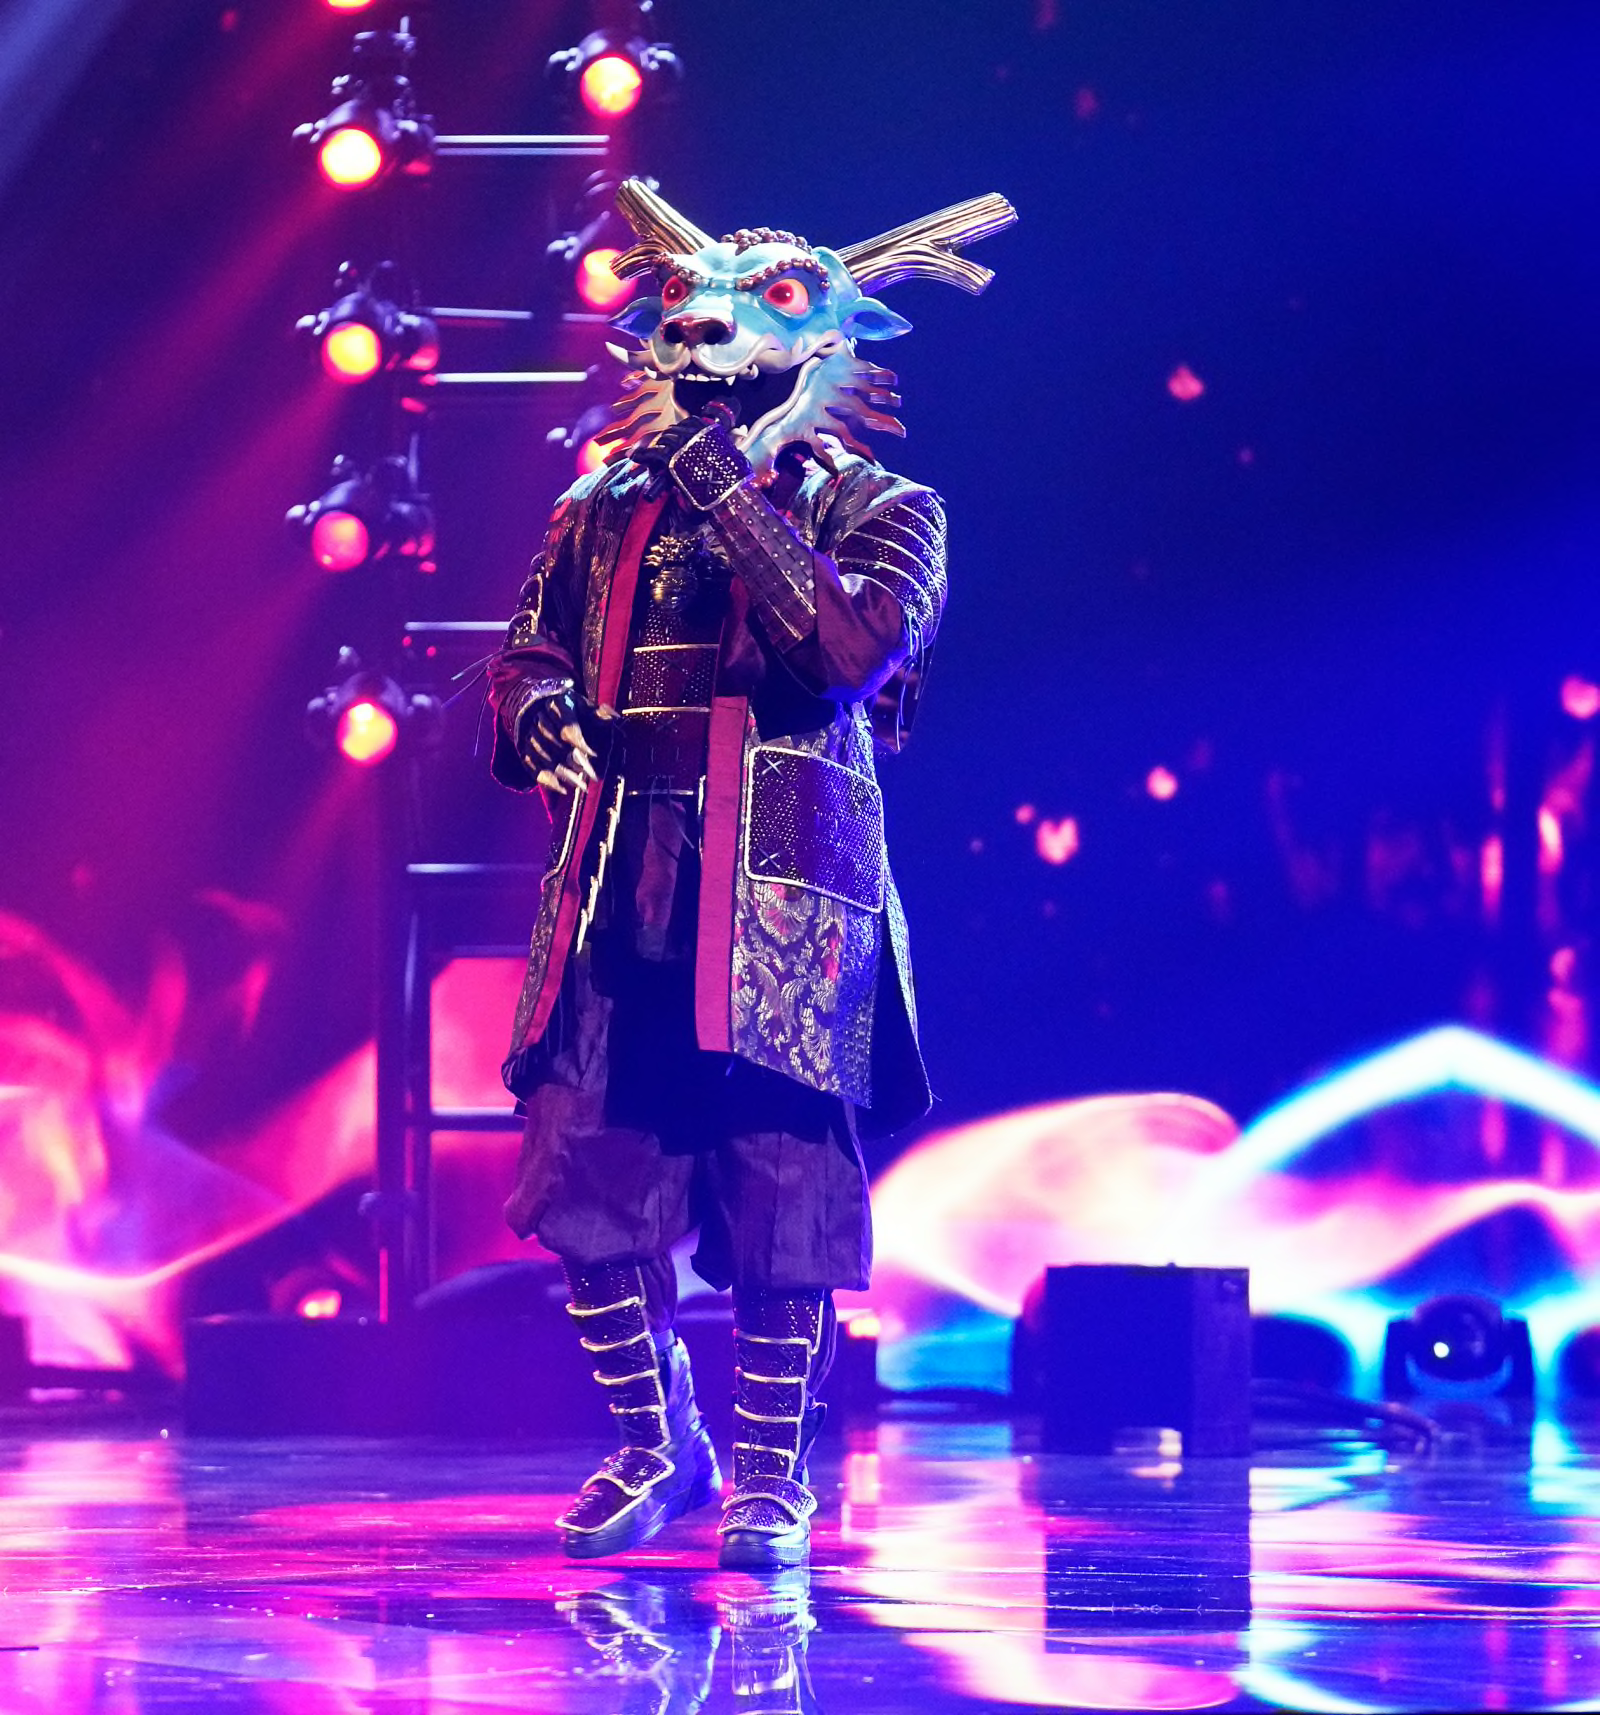 The Masked Singer: 3 reasons why it’s the best reality show on TV